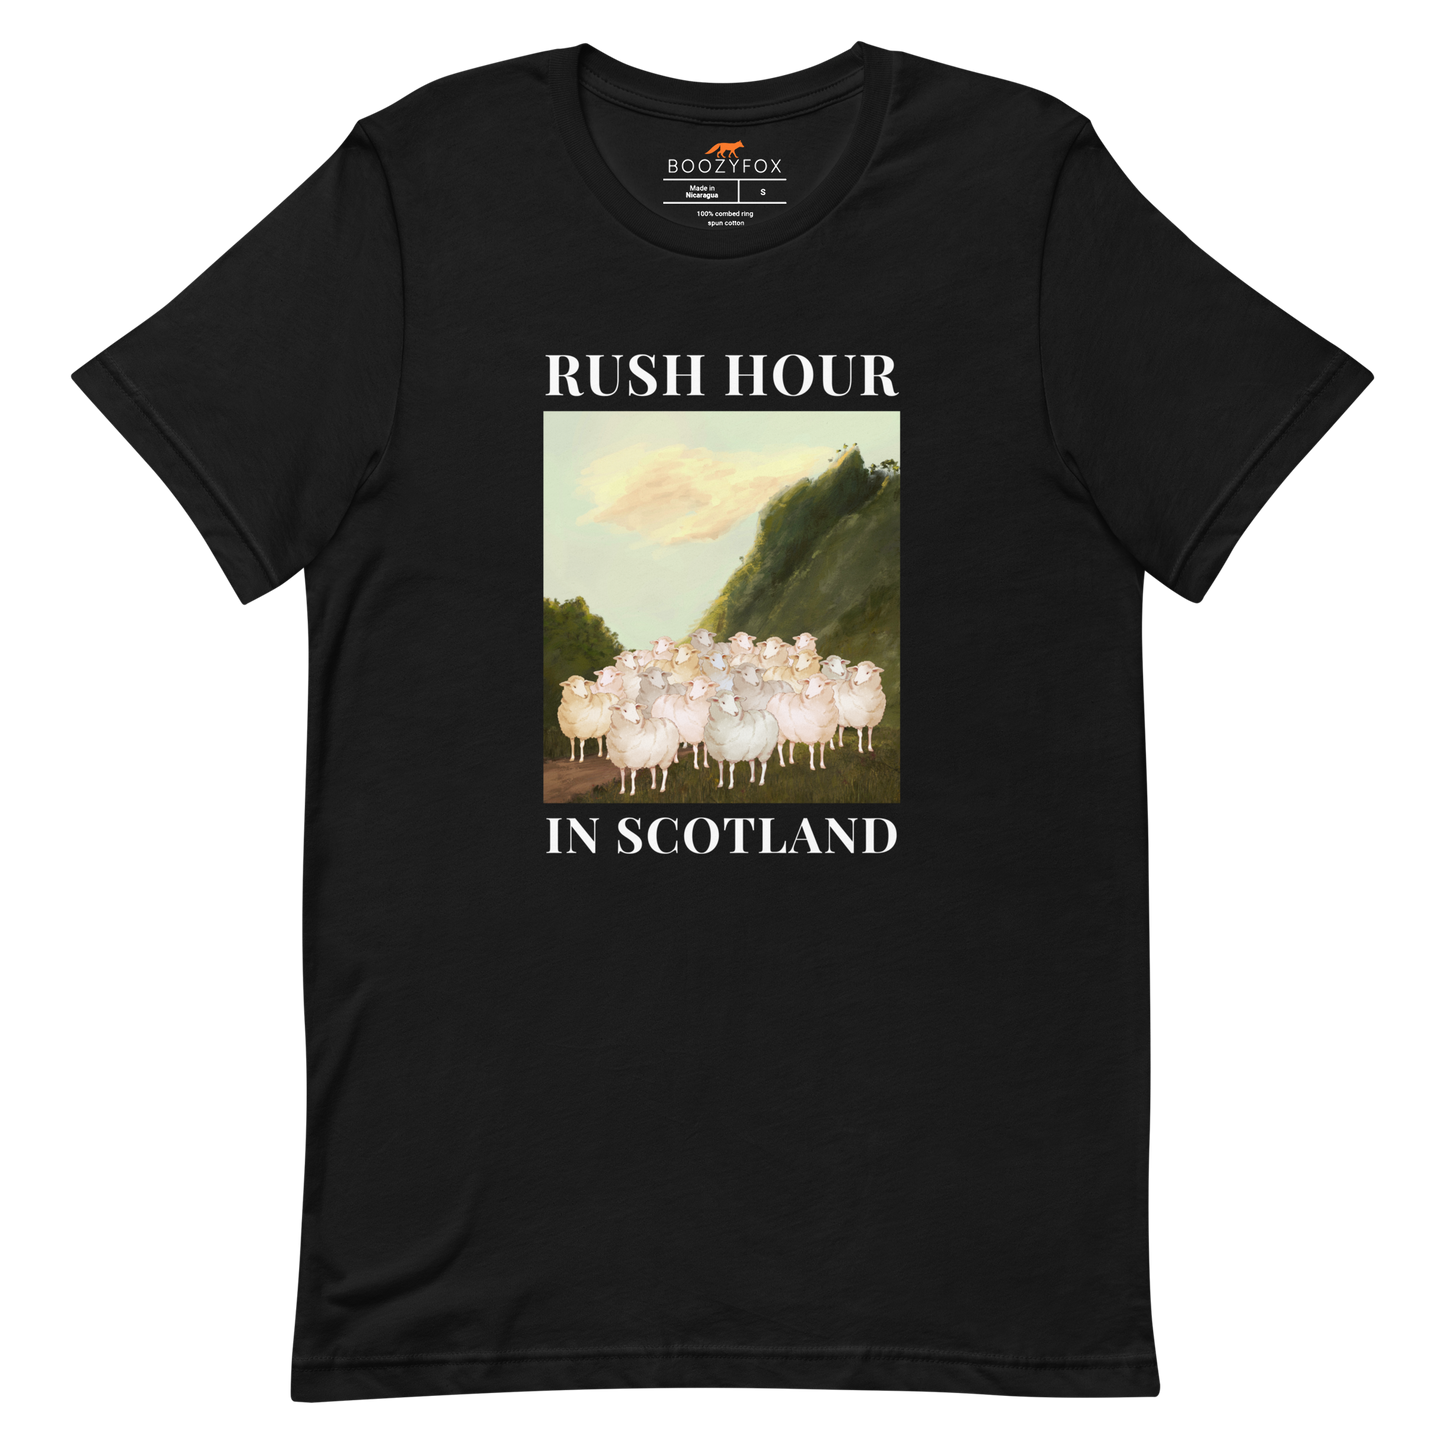 Black Premium Sheep T-Shirt featuring a comical Rush Hour In Scotland graphic on the chest - Artsy/Funny Graphic Sheep Tees - Boozy Fox